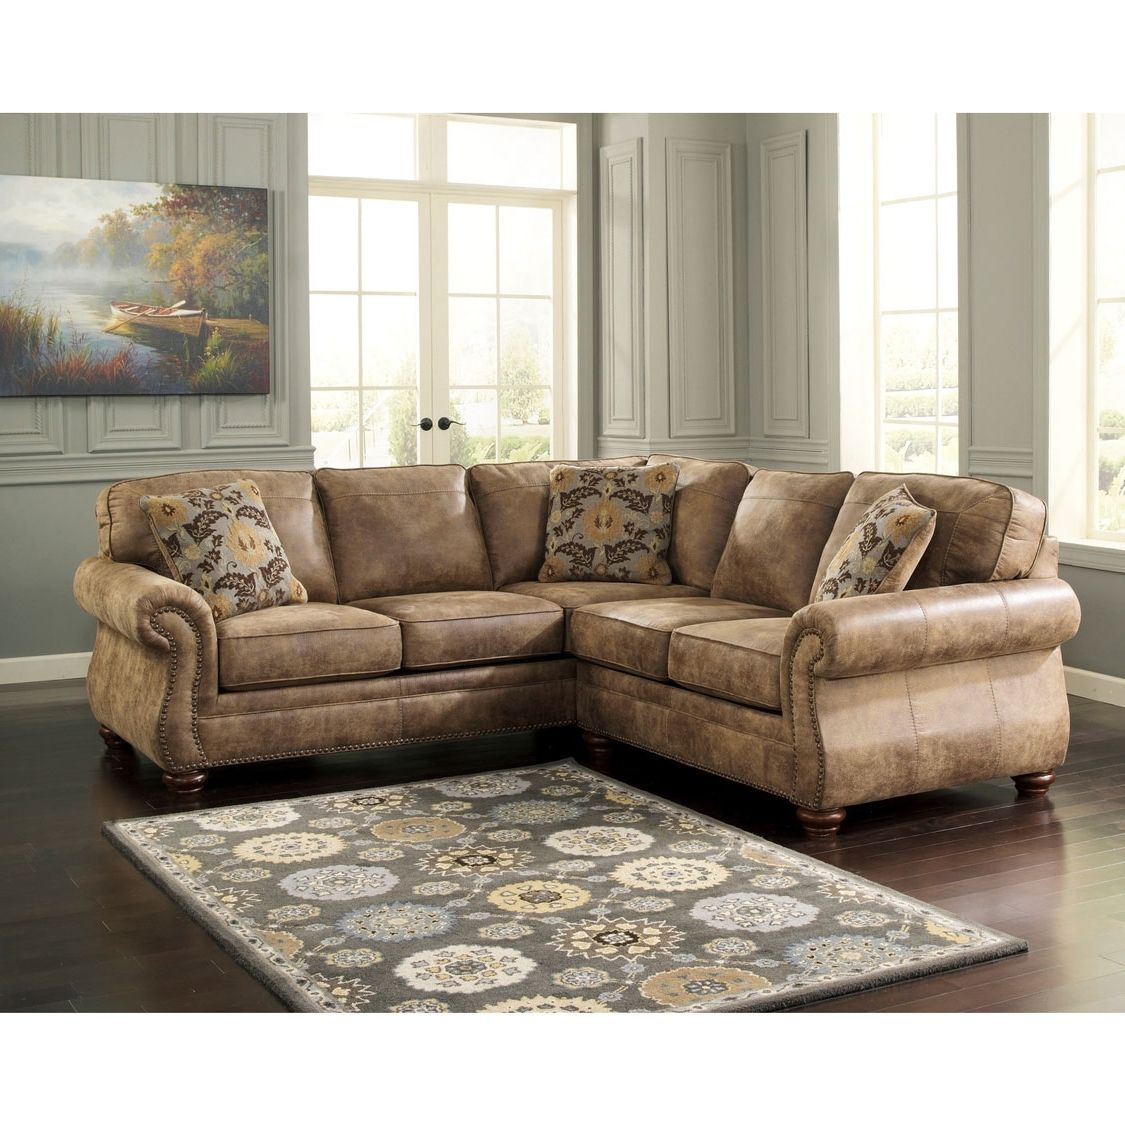 Sectional Sofa. Magnificent Collection Of Sectional Sofas Tucson In Well Known Tucson Sectional Sofas (Photo 4 of 15)